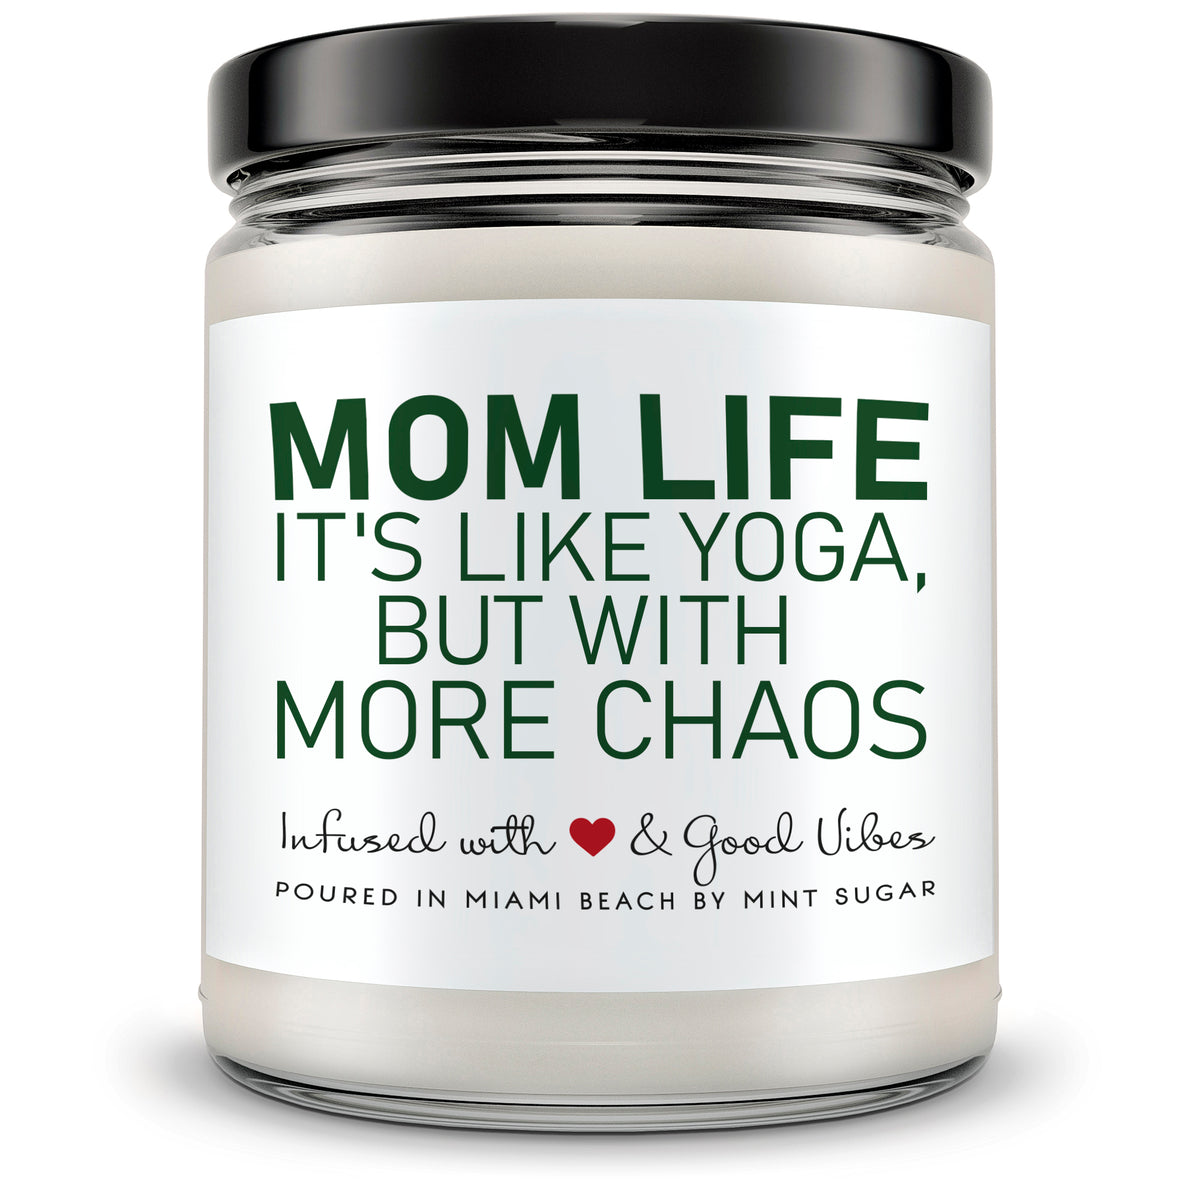 Mom Life is Like Yoga, But With More Chaos - Mint Sugar Candle